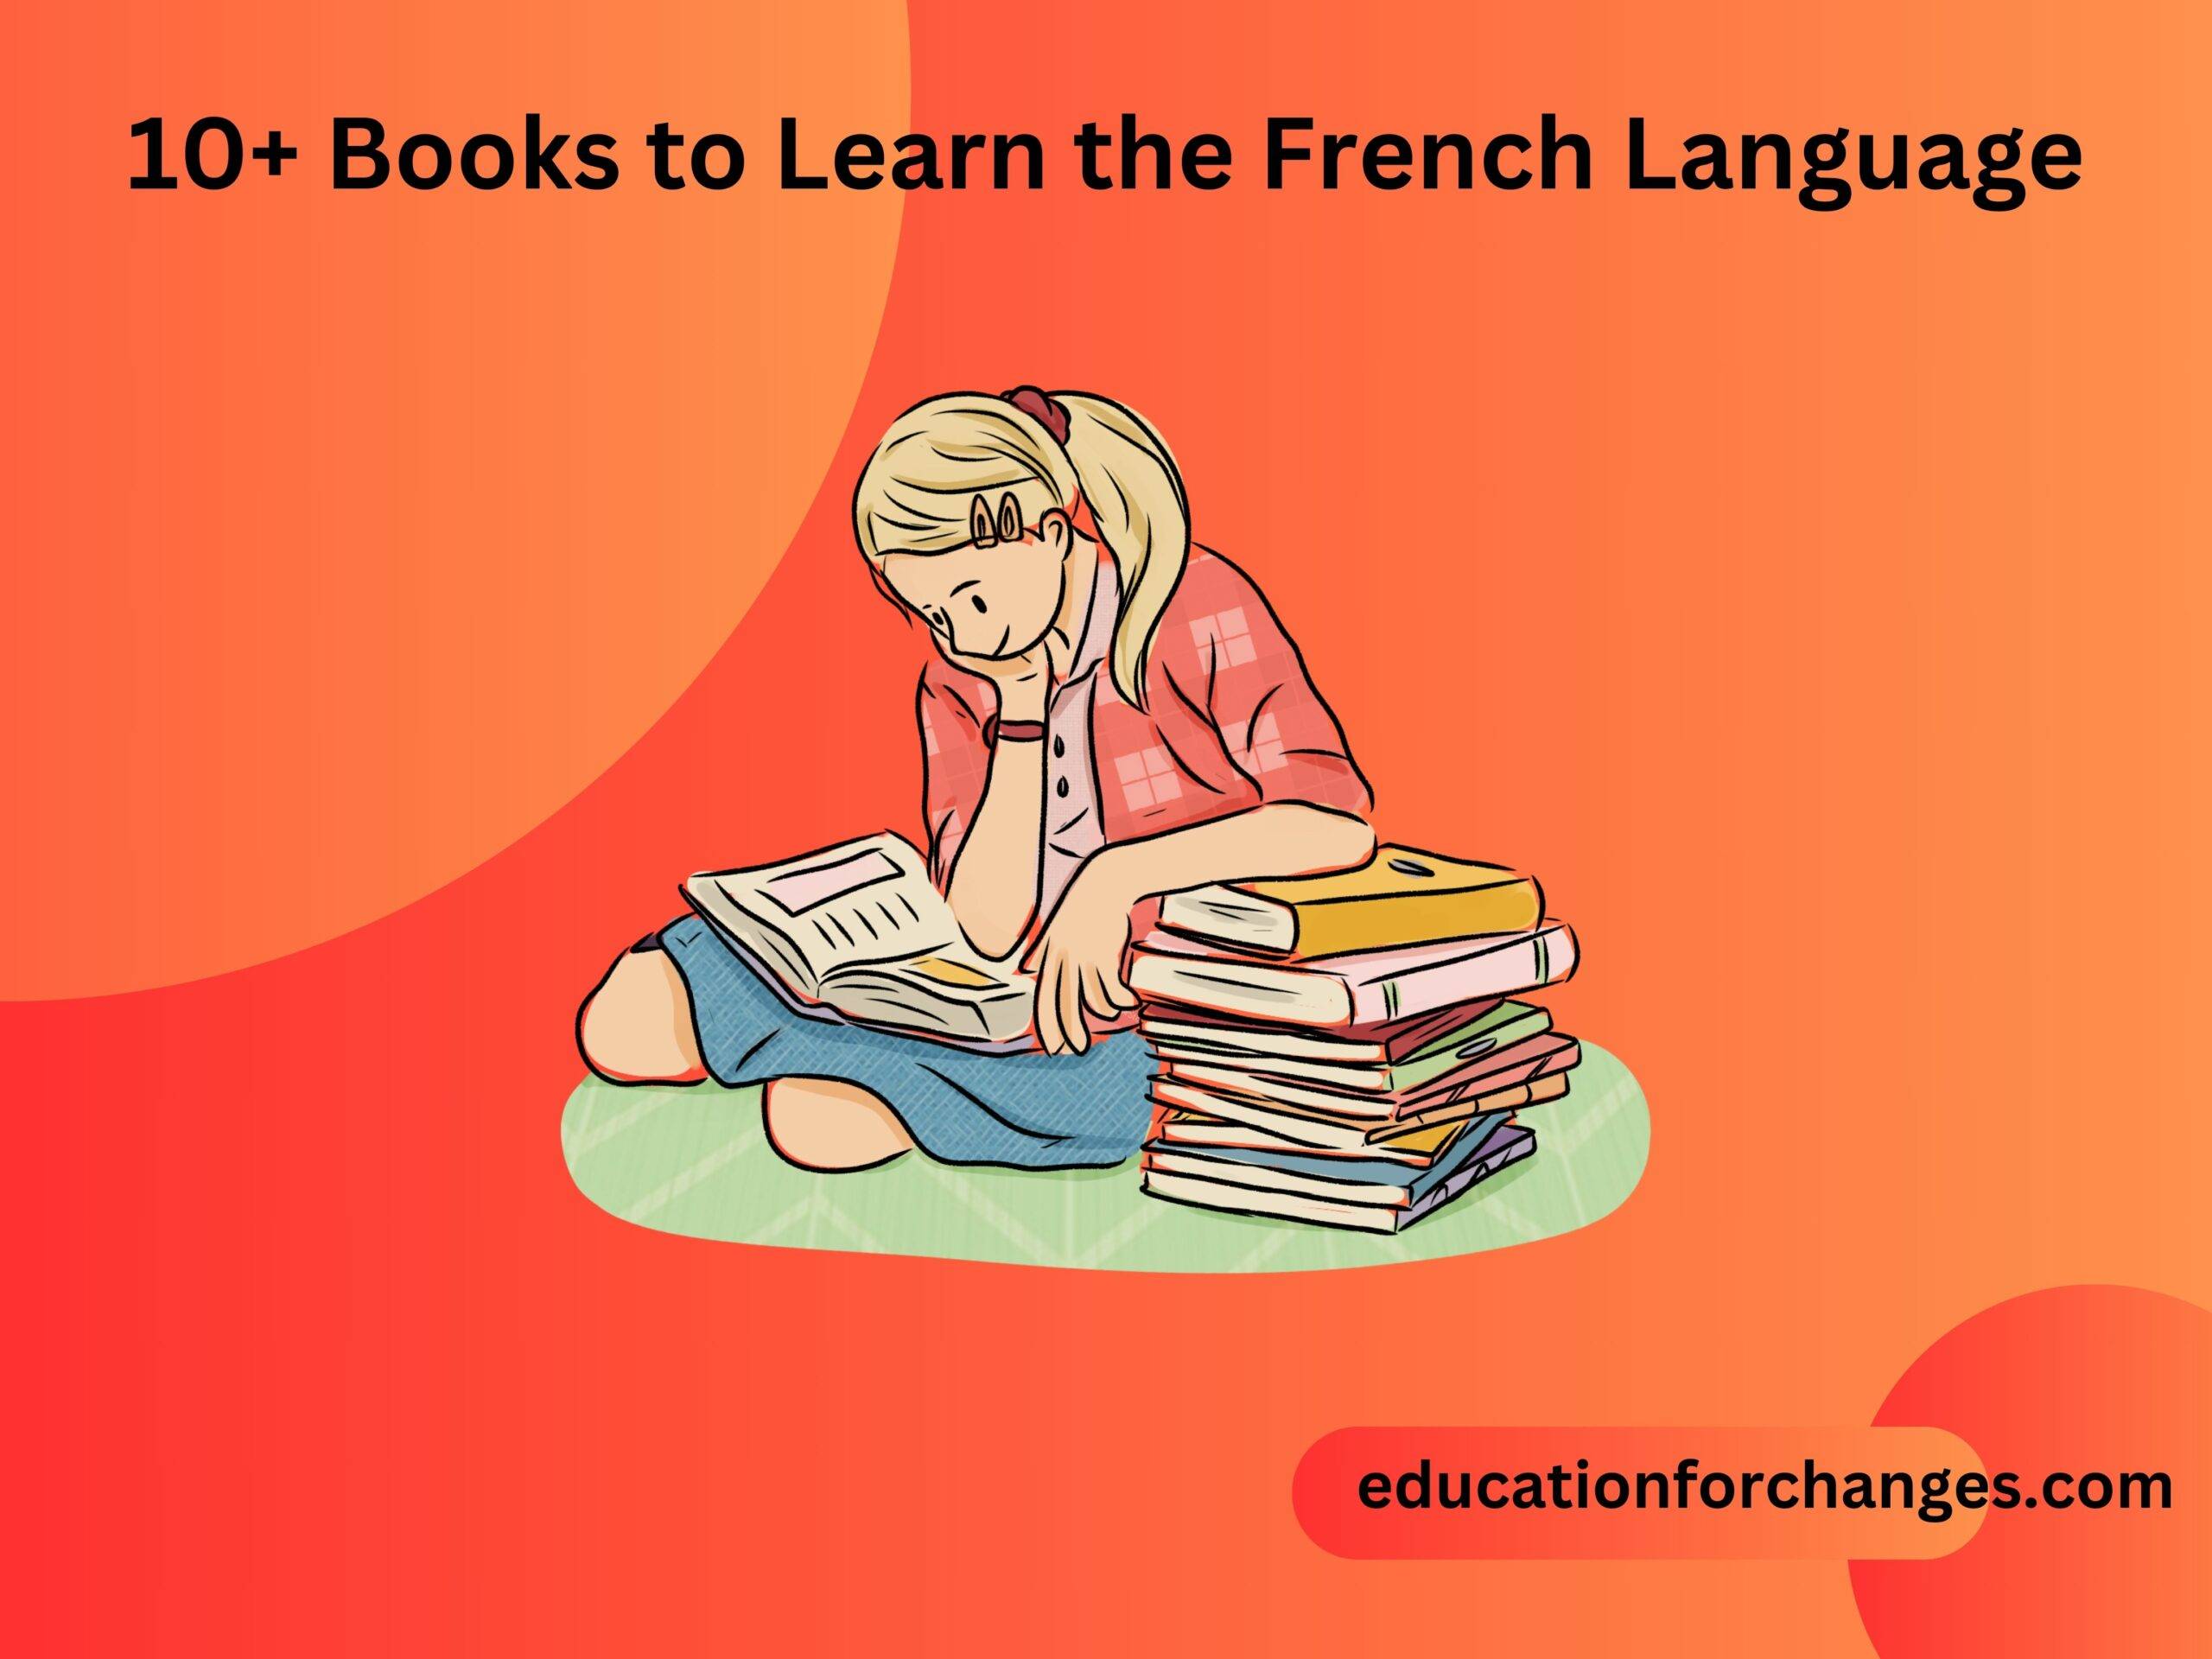 10+ Books to Learning the French Language